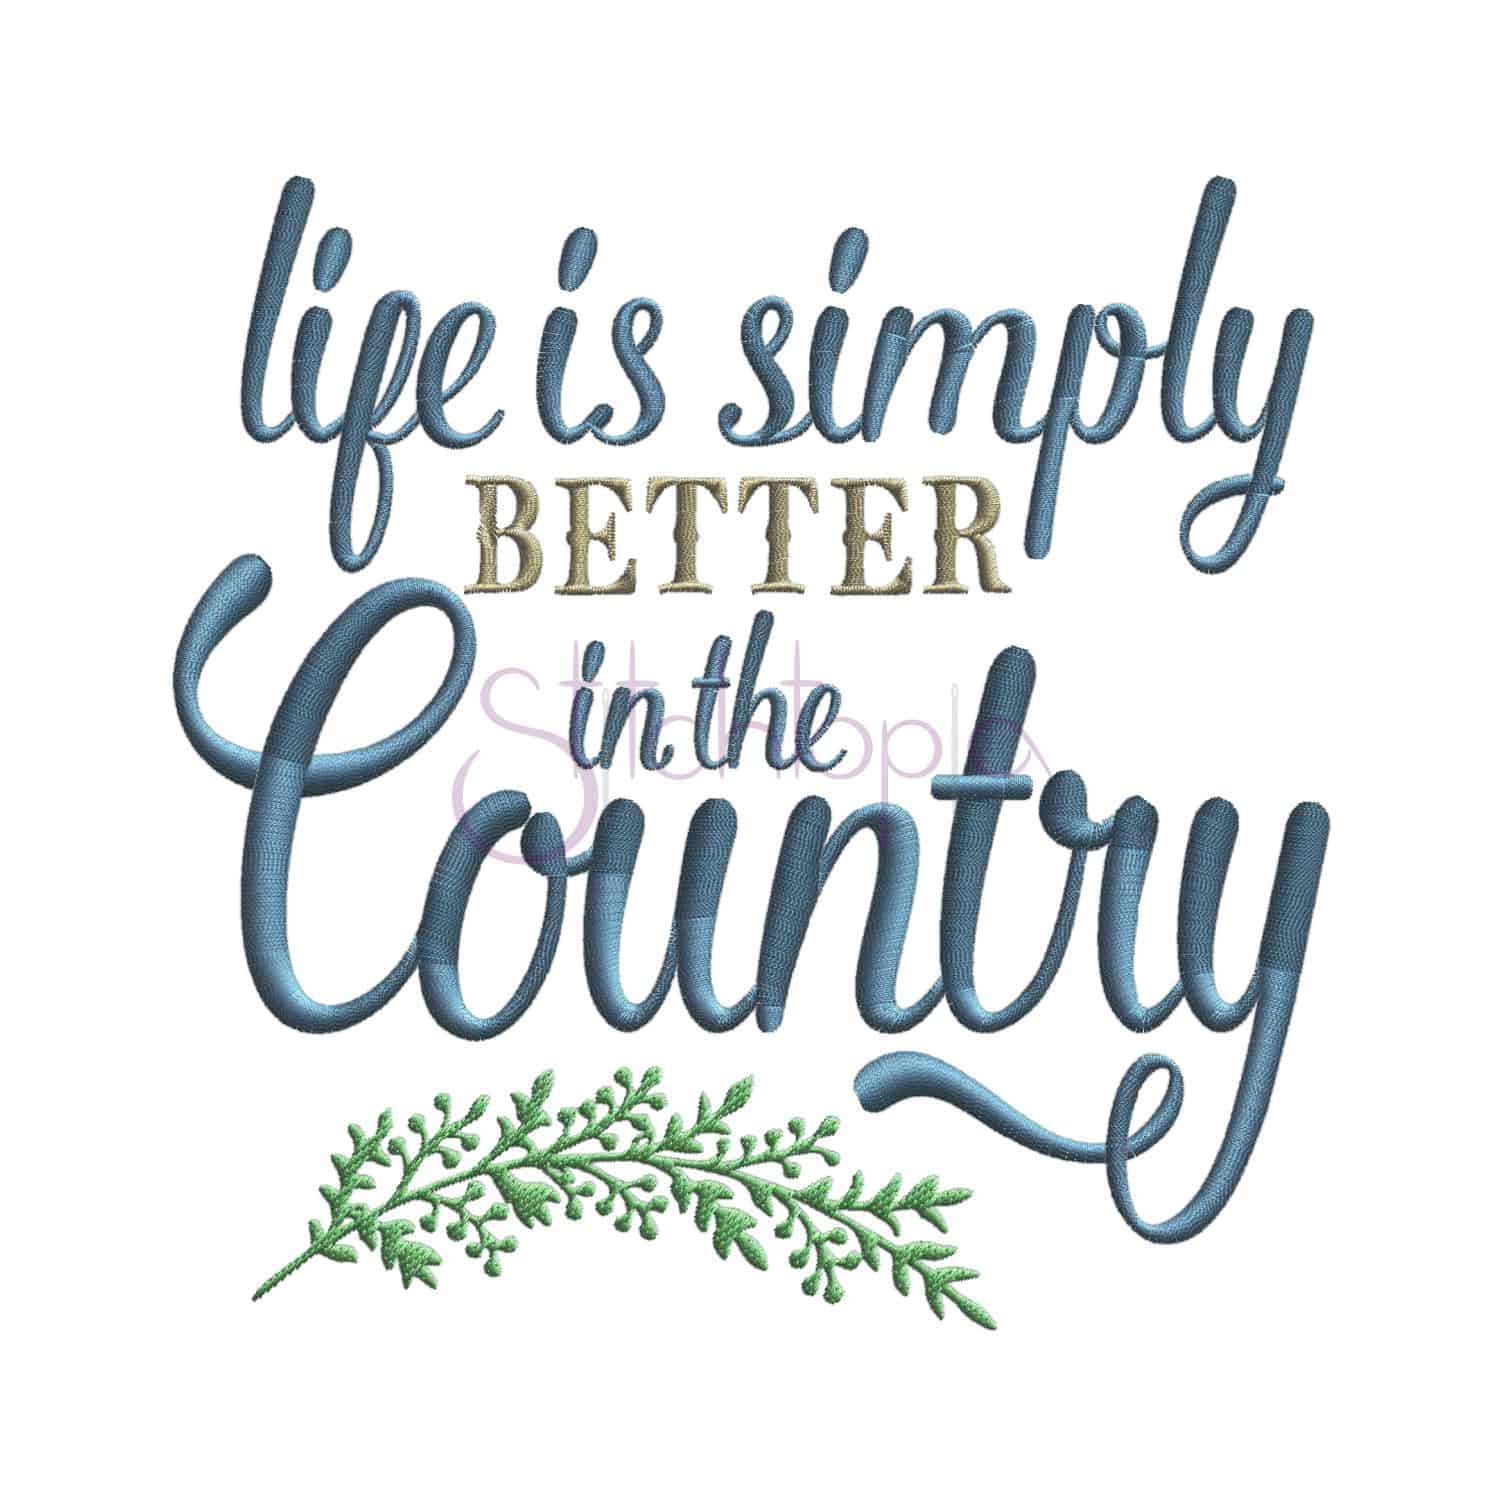 life is better country